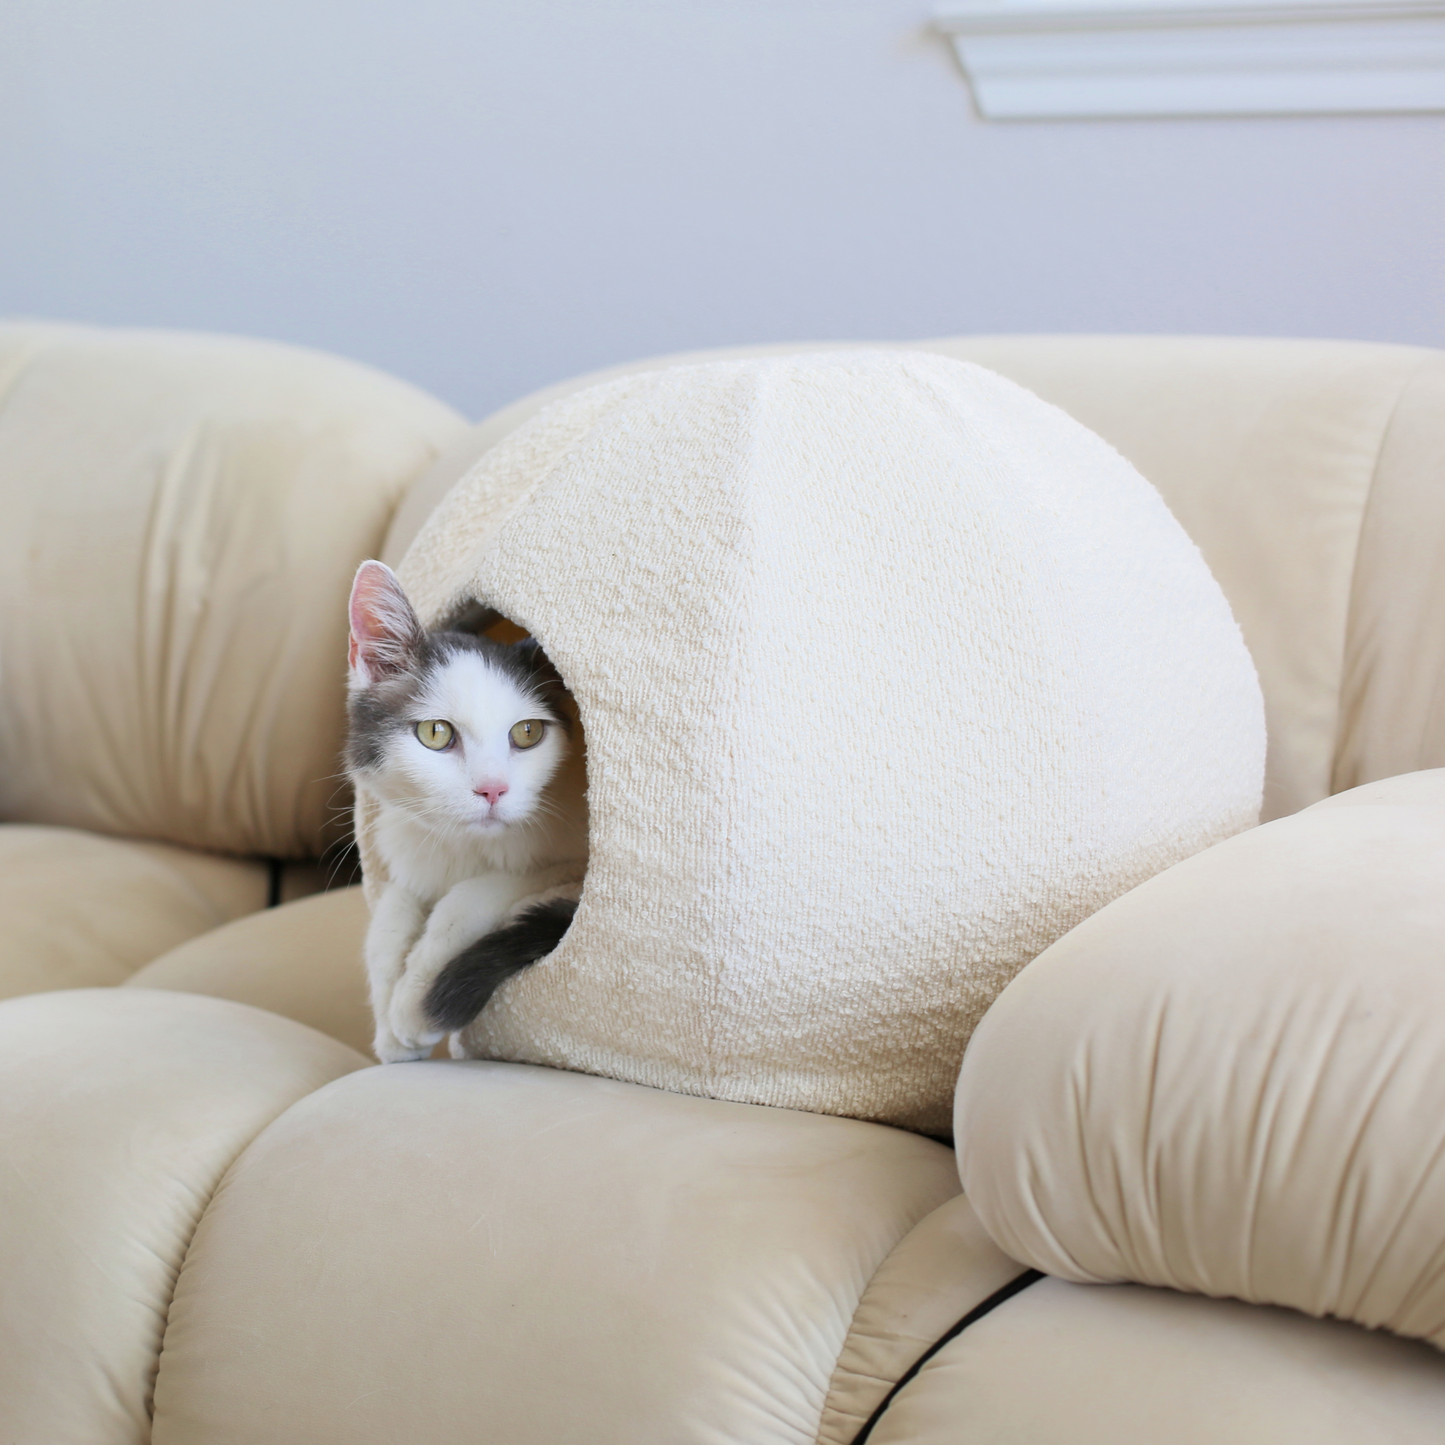 grey and white cat in cat bed cave or cat cave that is a covered modern cat bed in white boucle on couch in aesthetic home